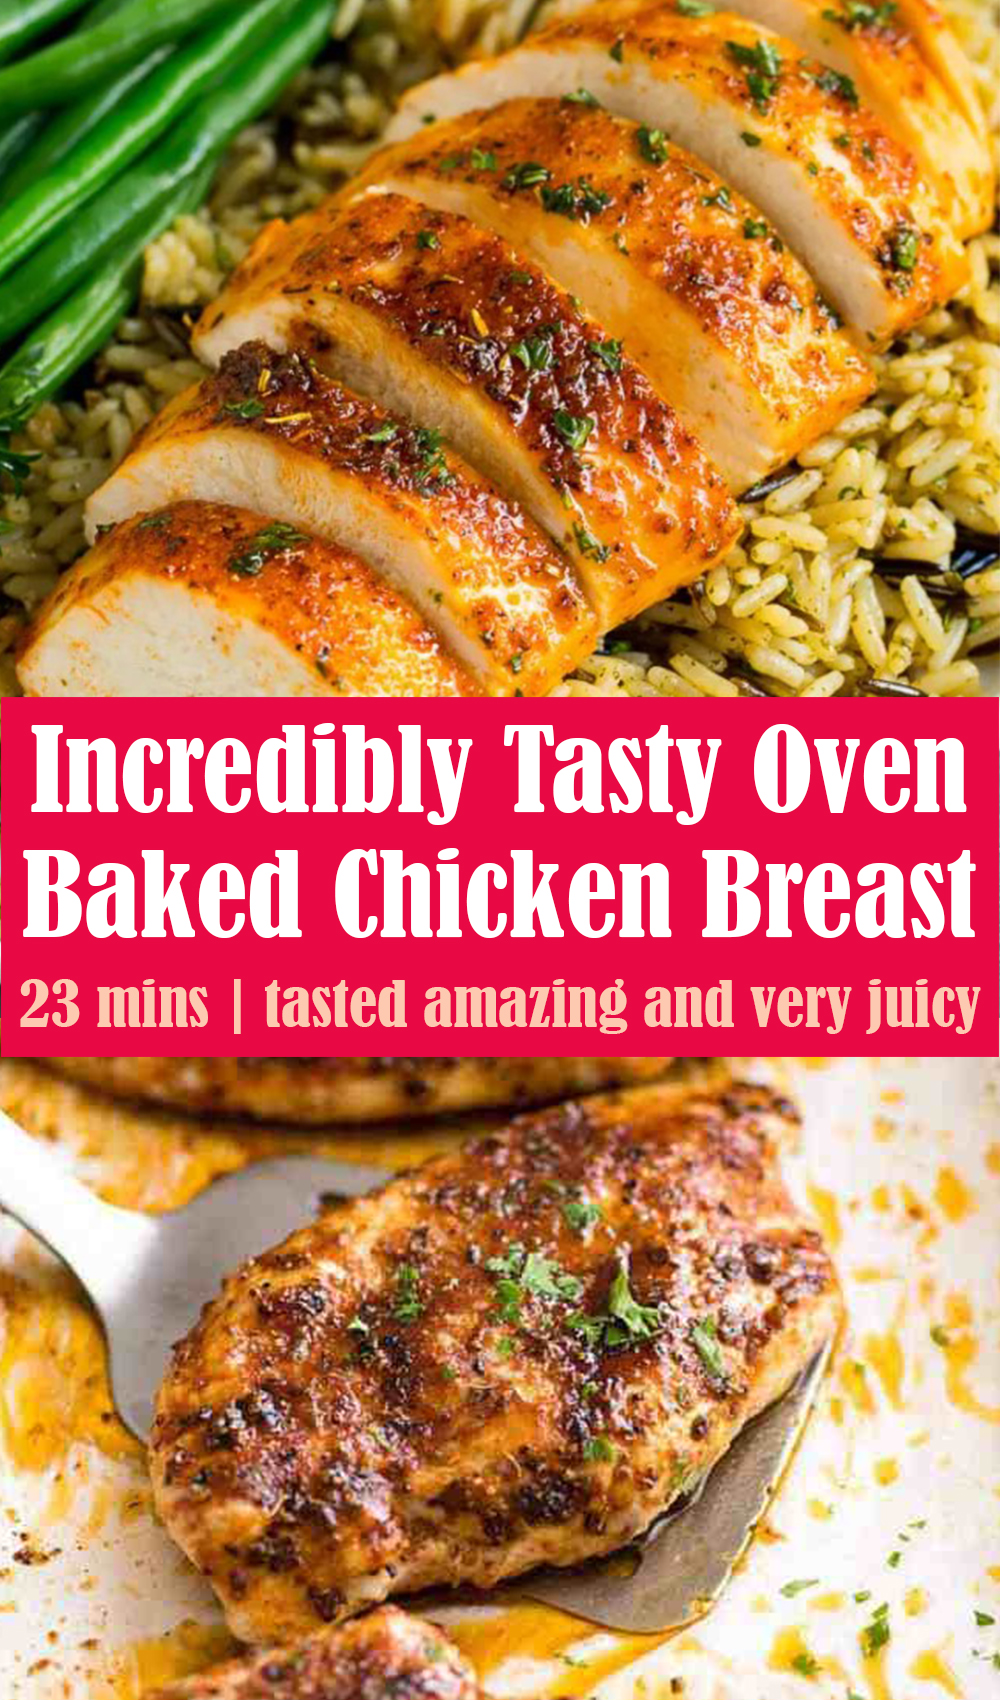 Incredibly Tasty Oven Baked Chicken Breast